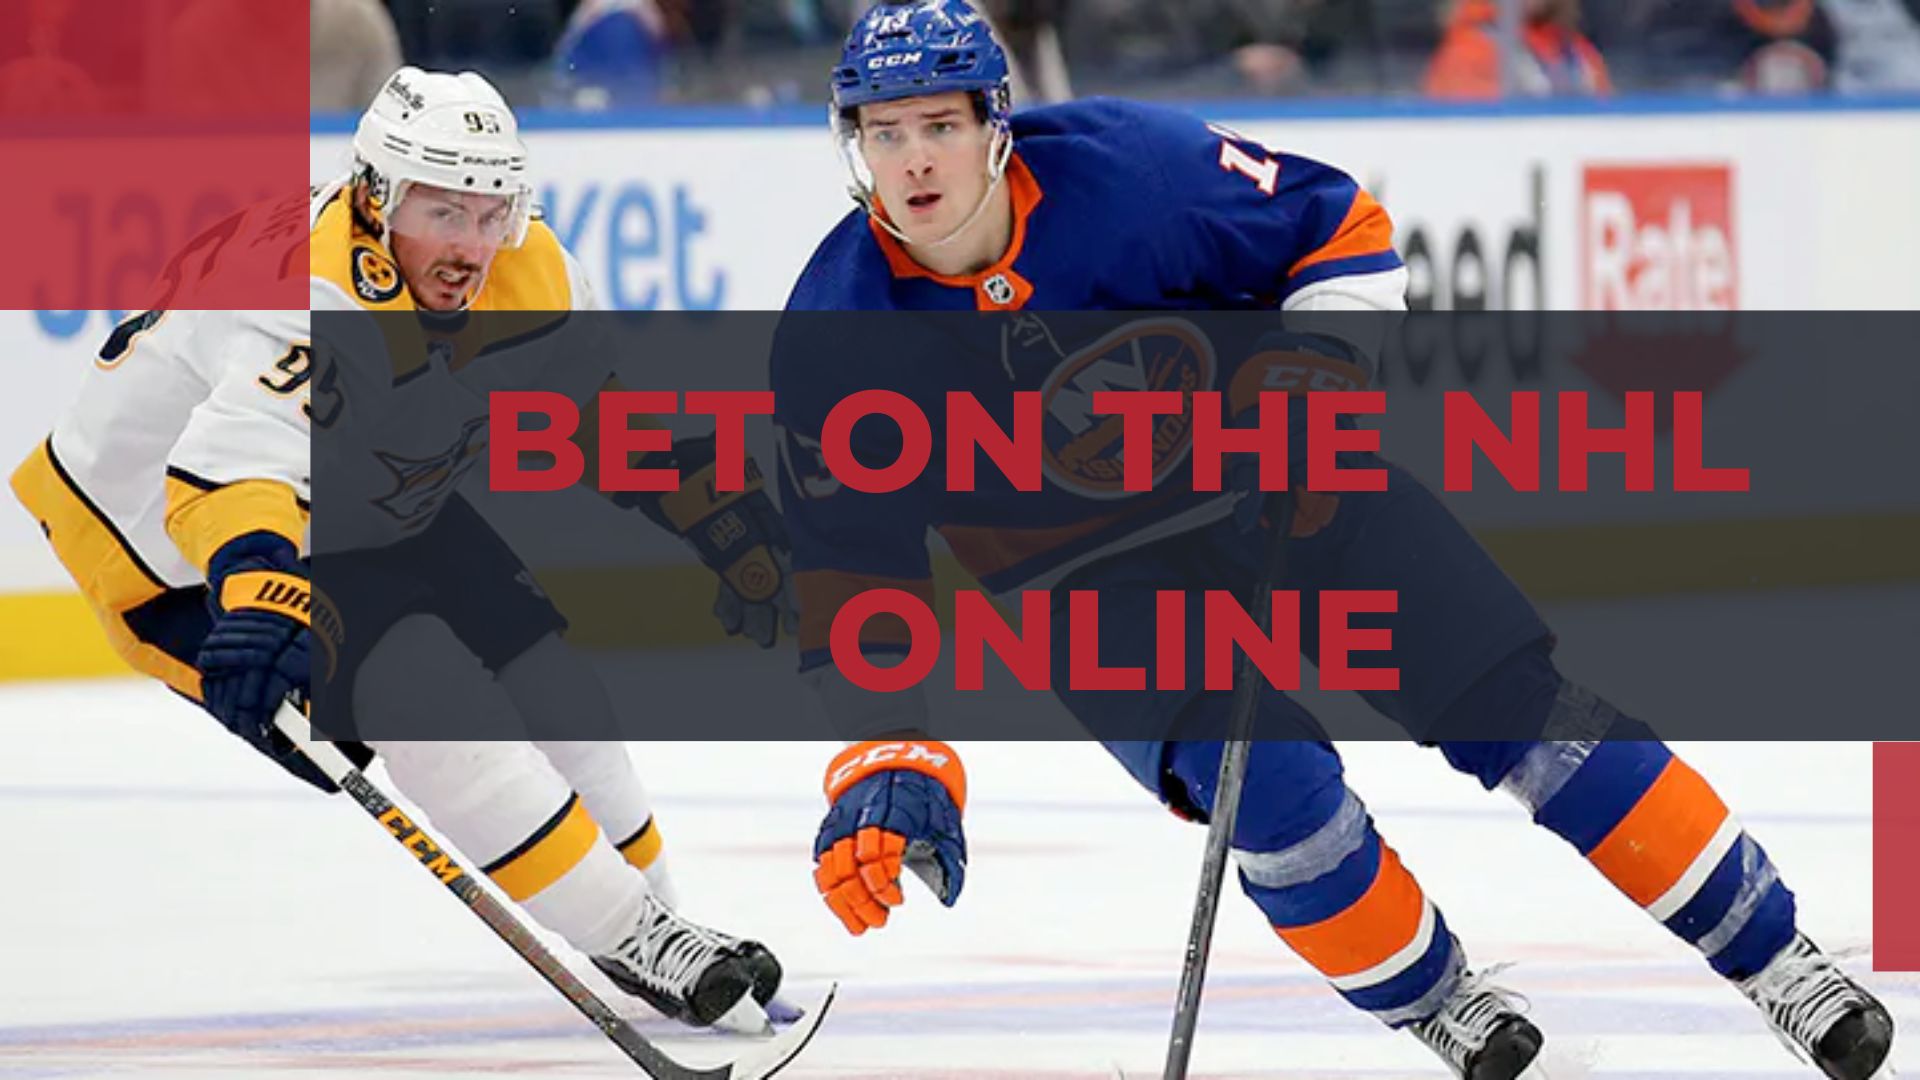 Where can I bet on the NHL online?